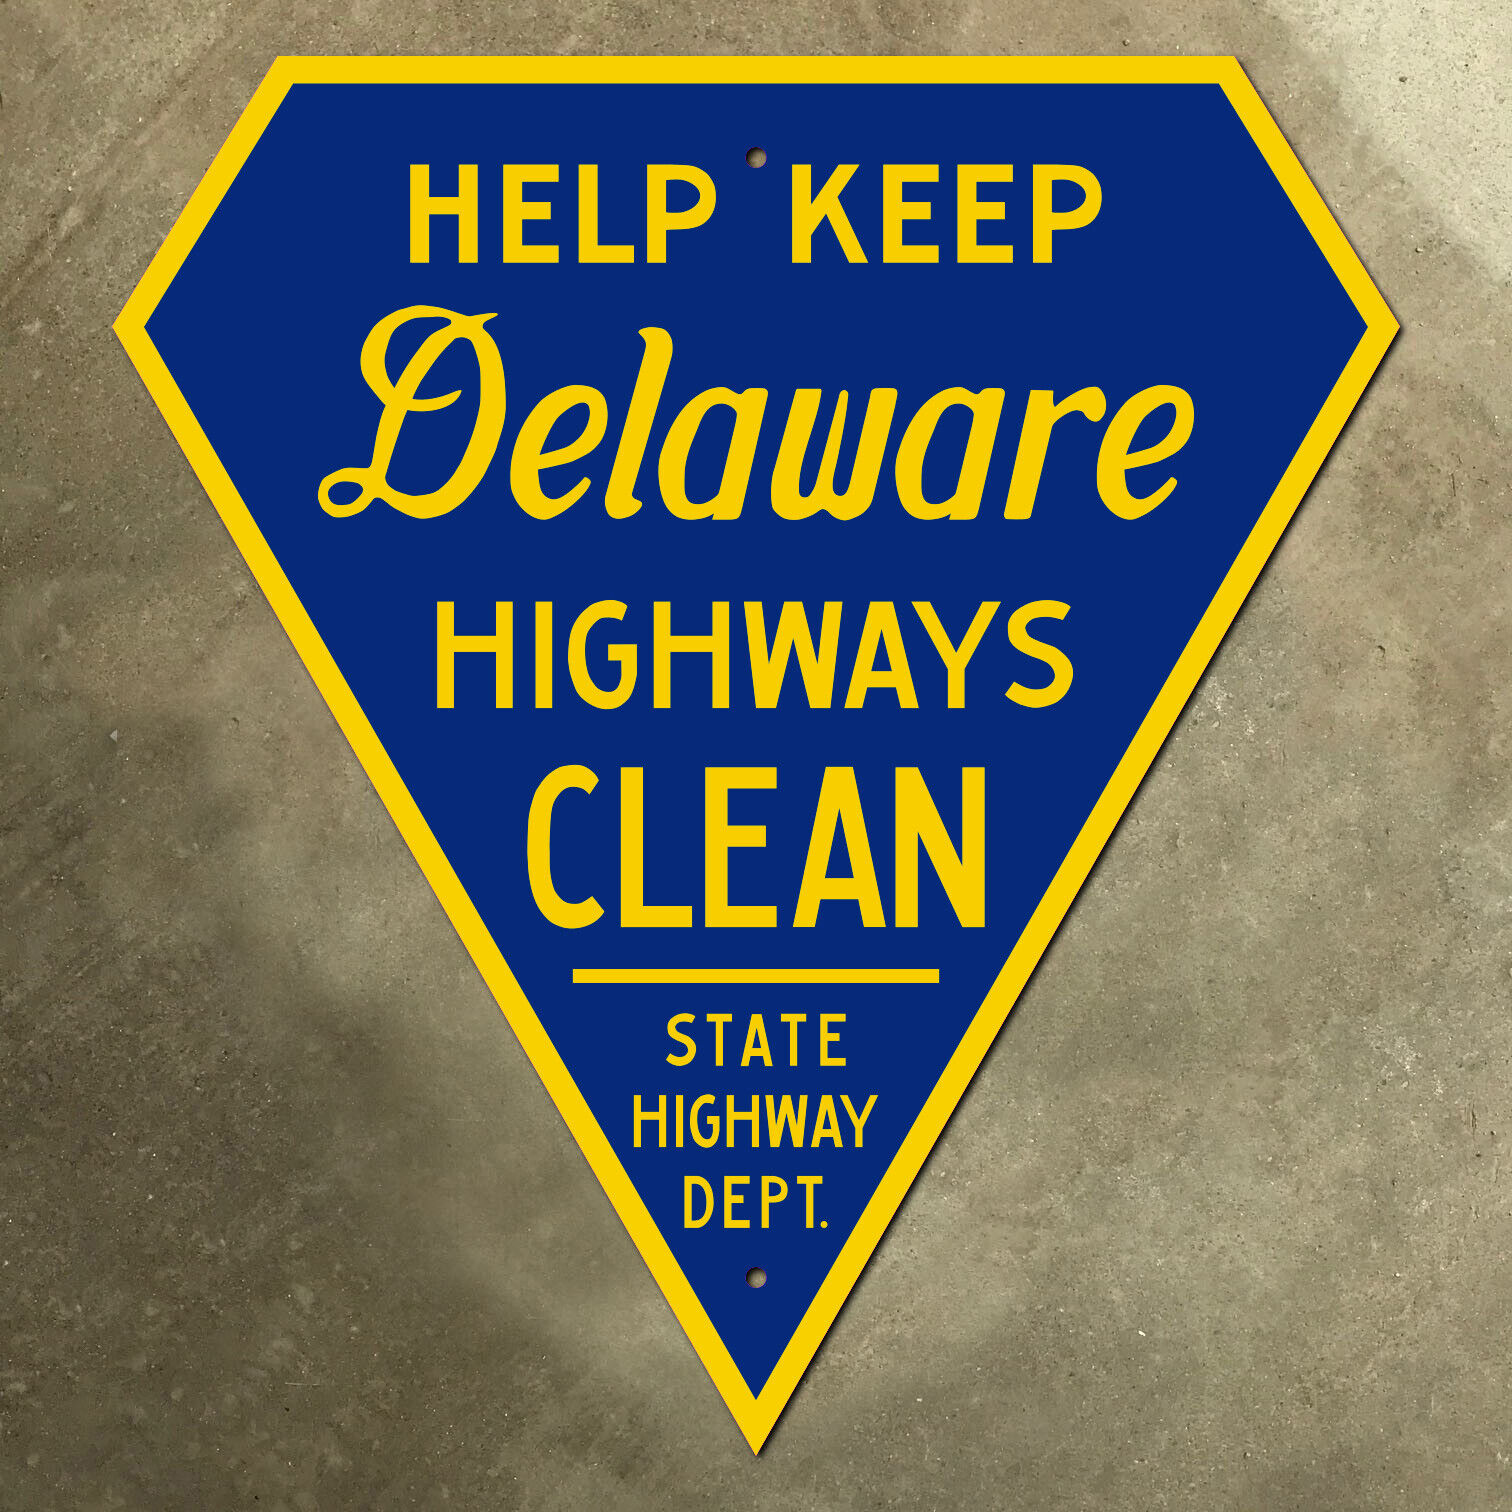 Delaware help keep highways clean marker road sign litter environment 17x18